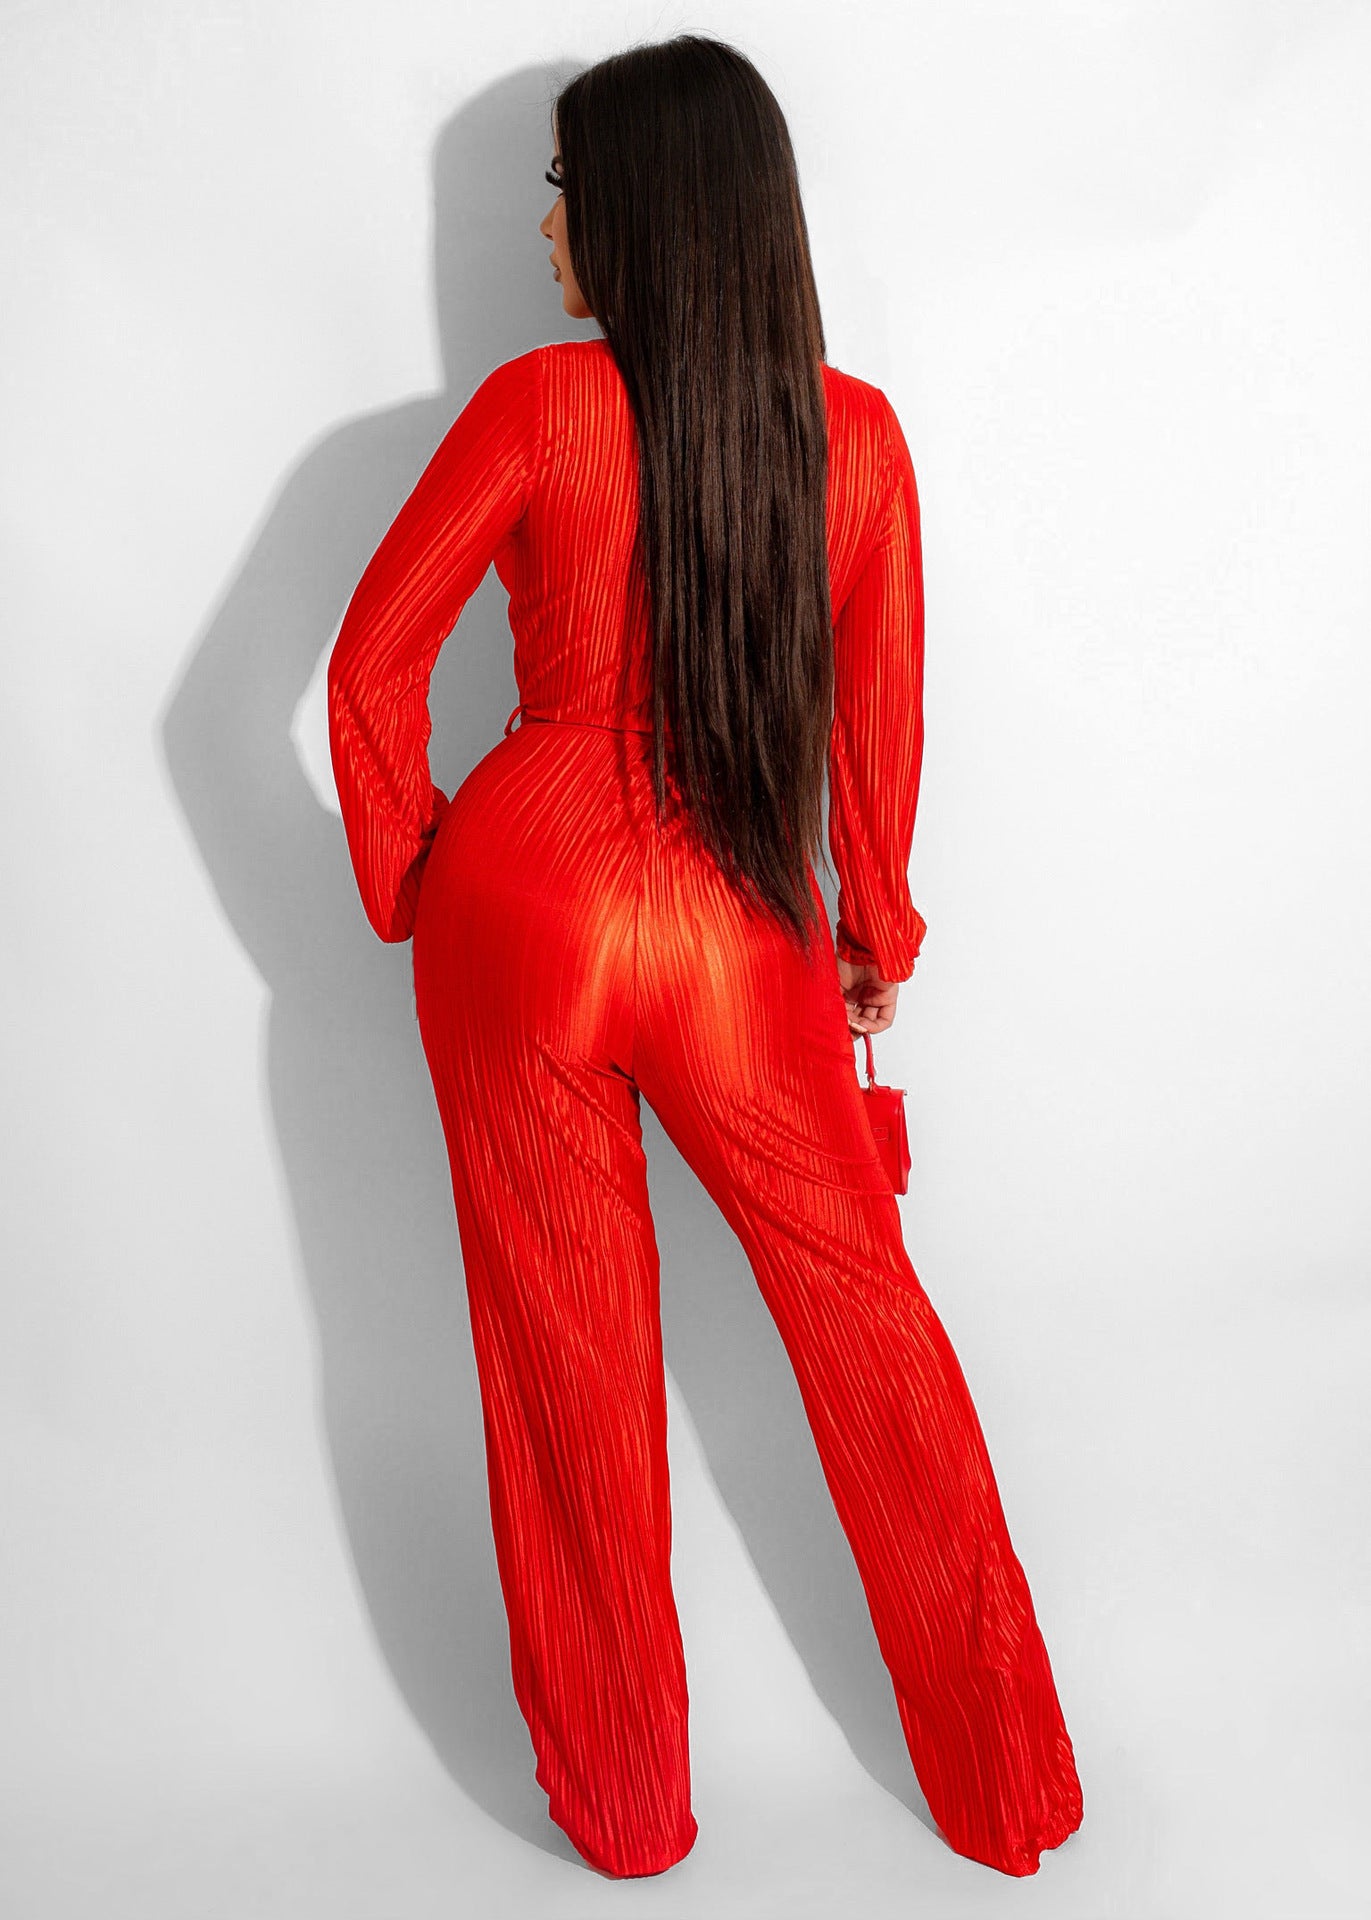 autumn winter low cut sexy collared long sleeve draping pleated jumpsuit